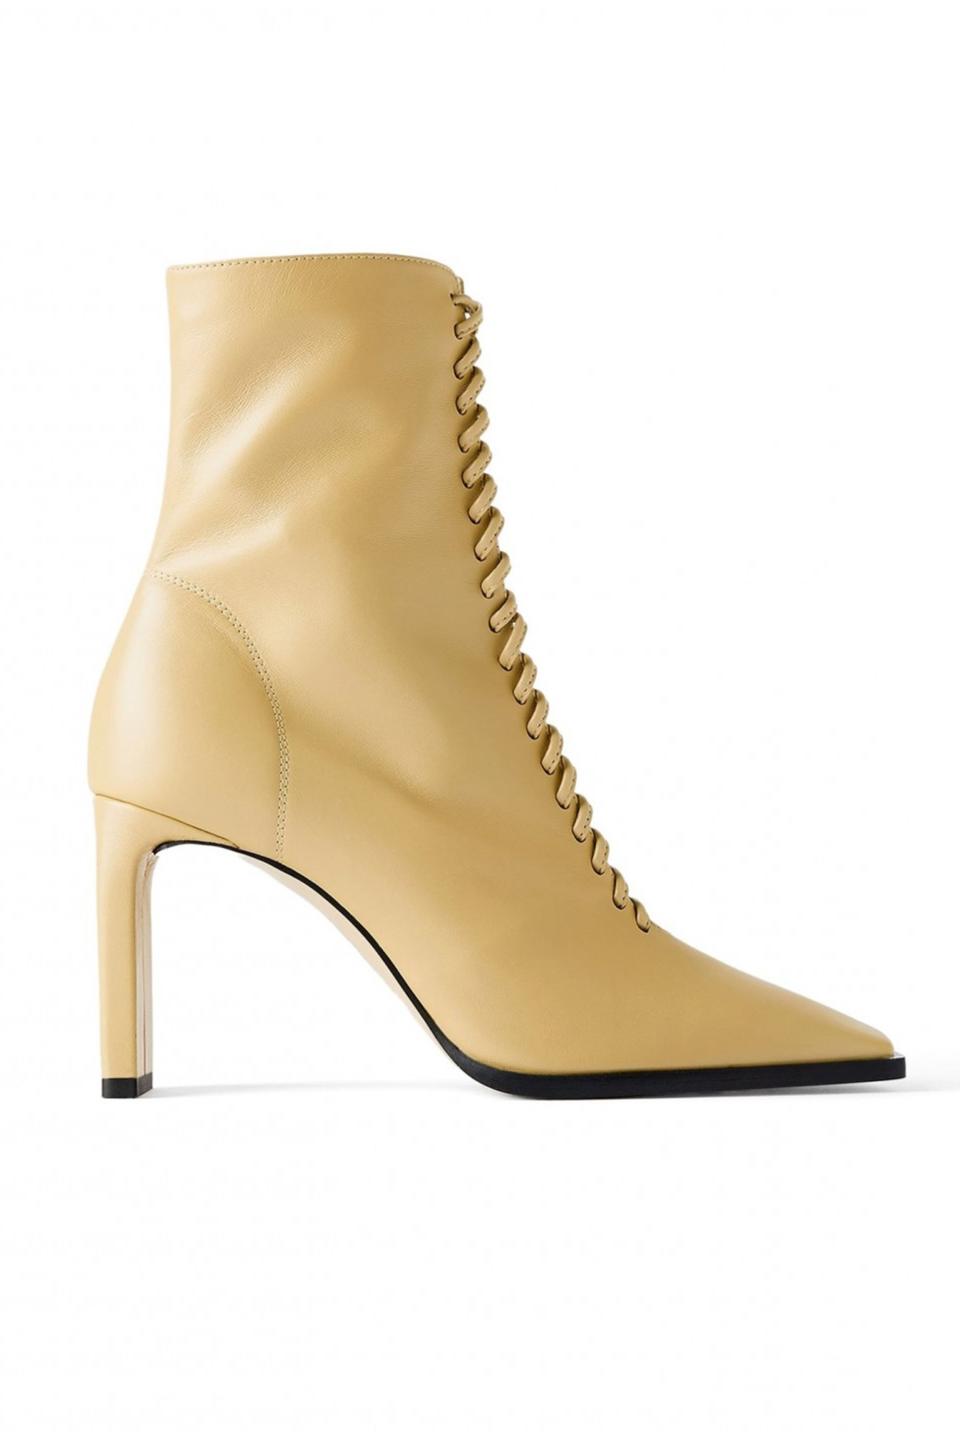 6) Laced Leather Ankle Boots